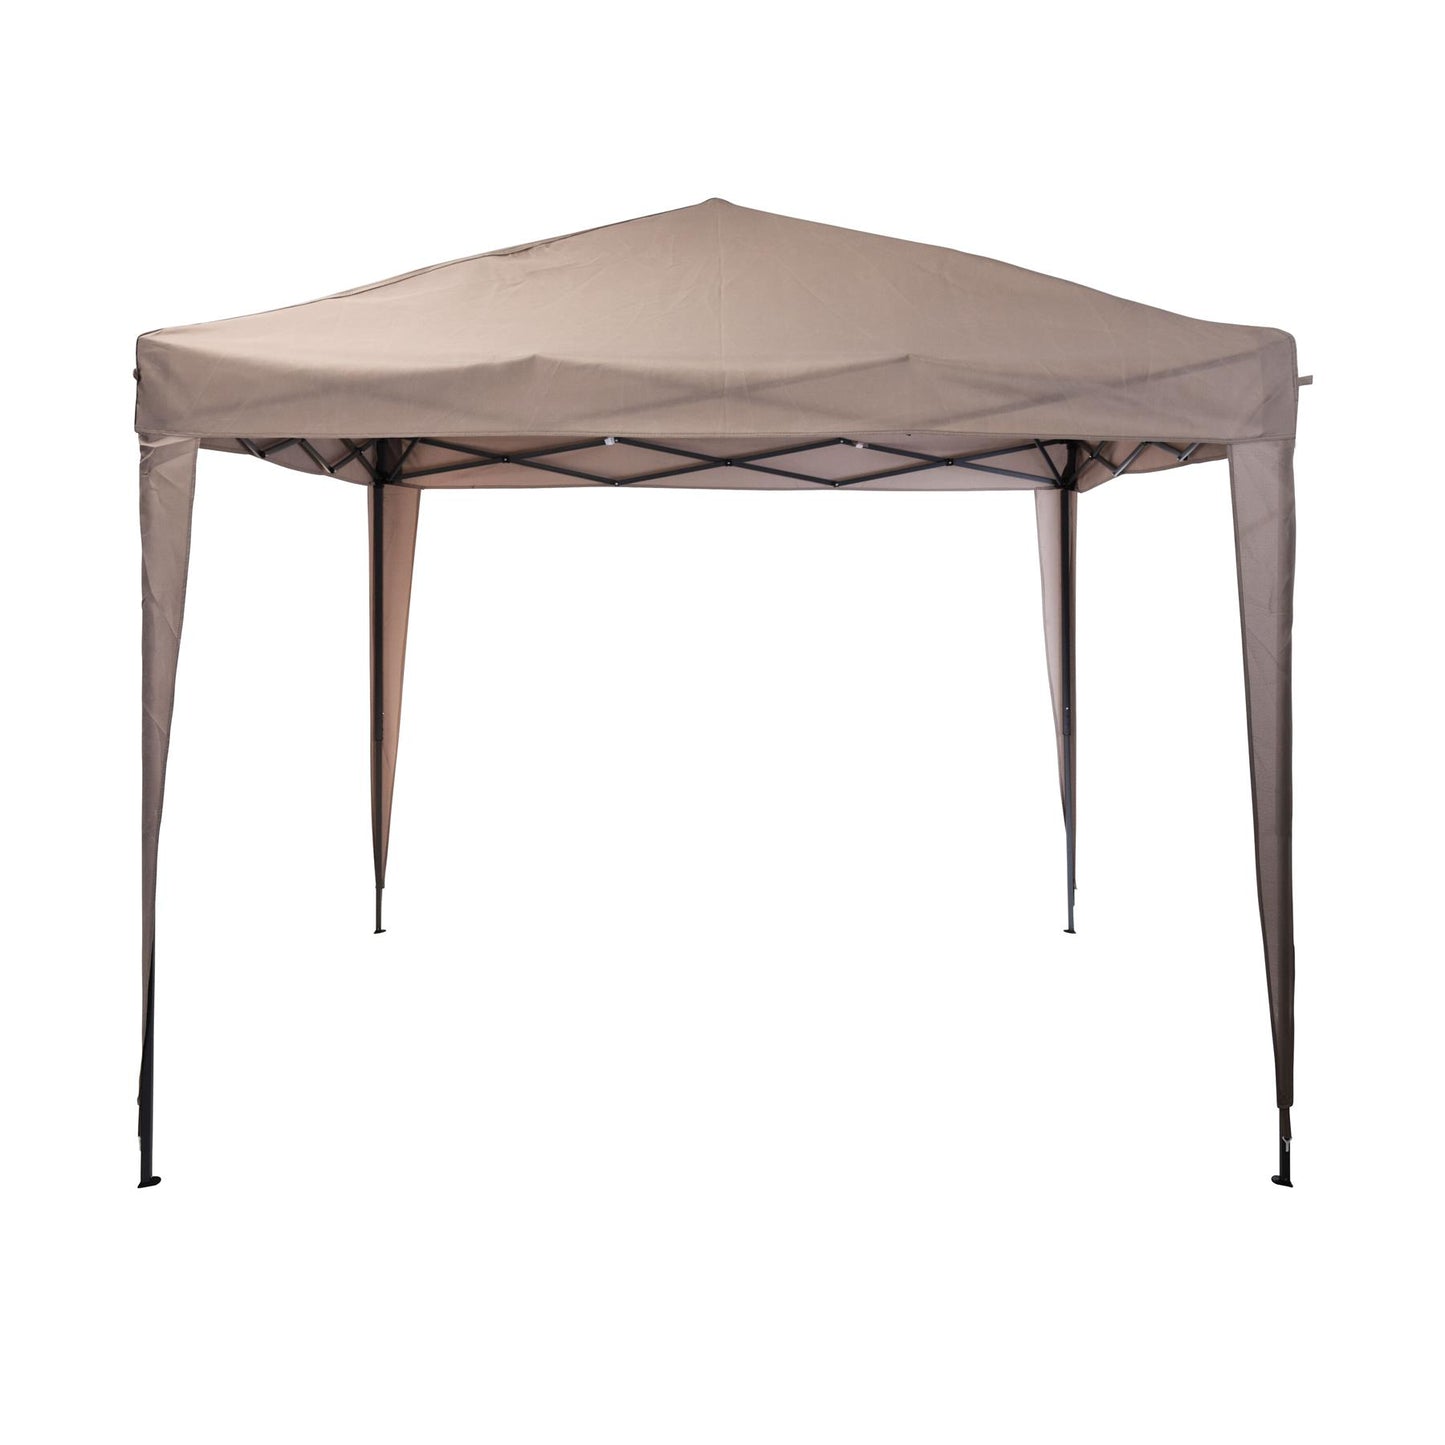 Pop Up Marquee Gazebo Canopy Taupe 3x3m Garden Party Tent